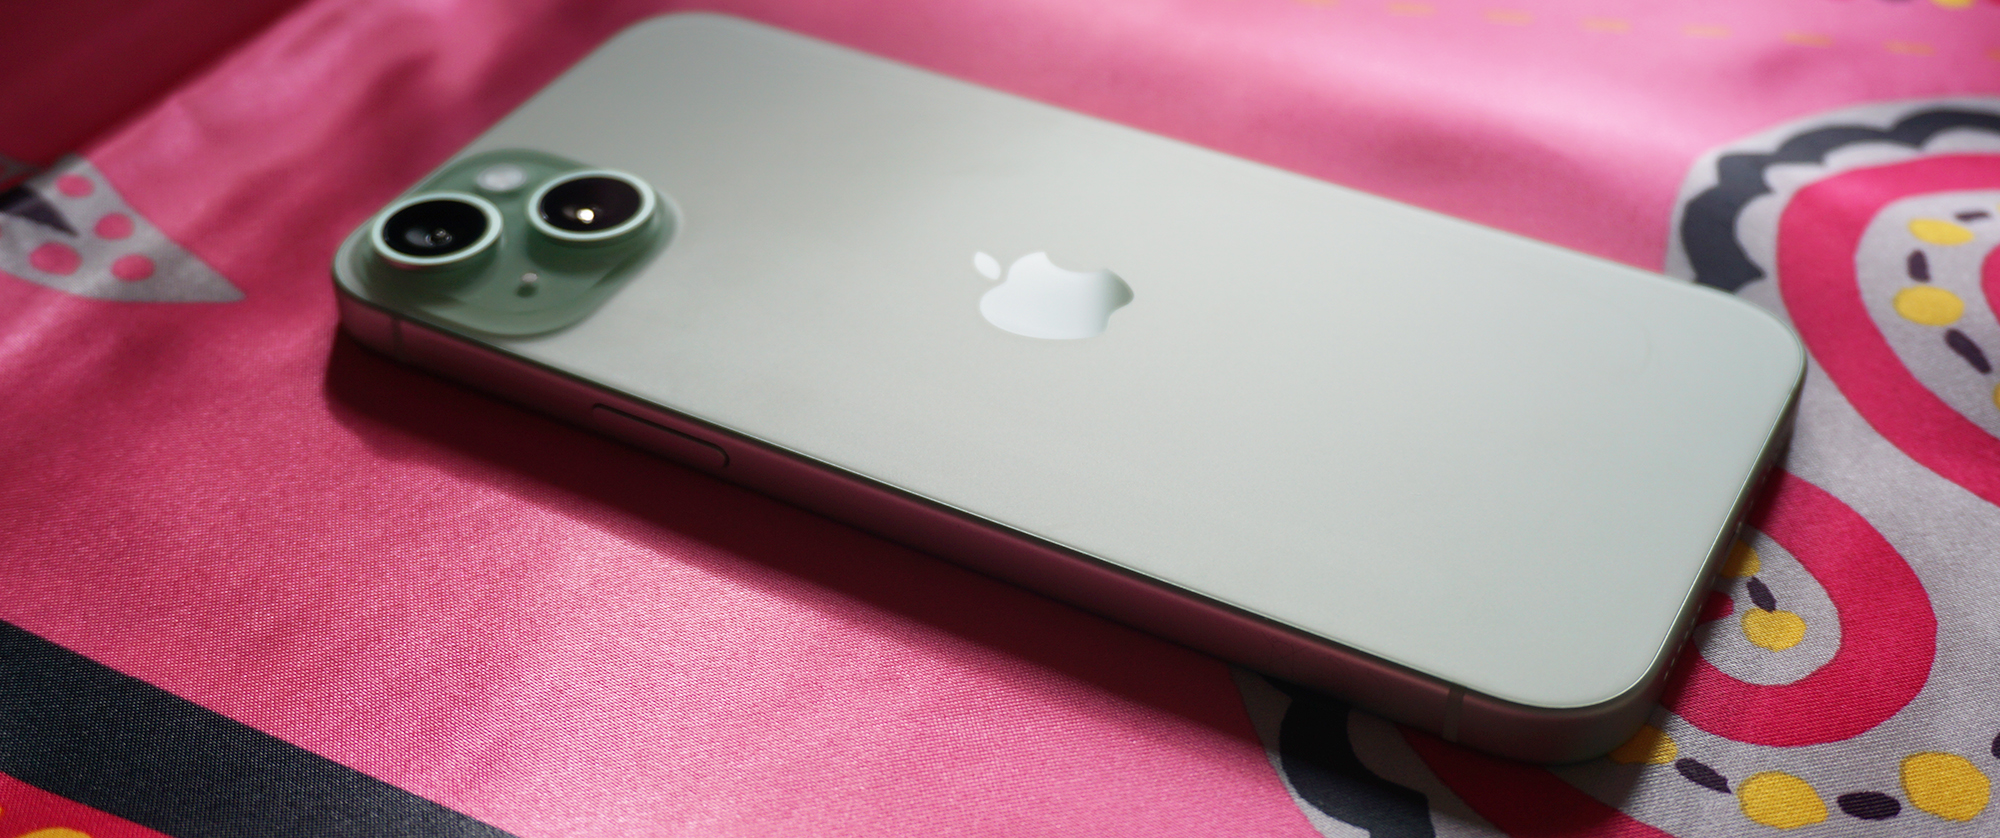 Apple did something with the iPhone 15 Plus that I didn't expect